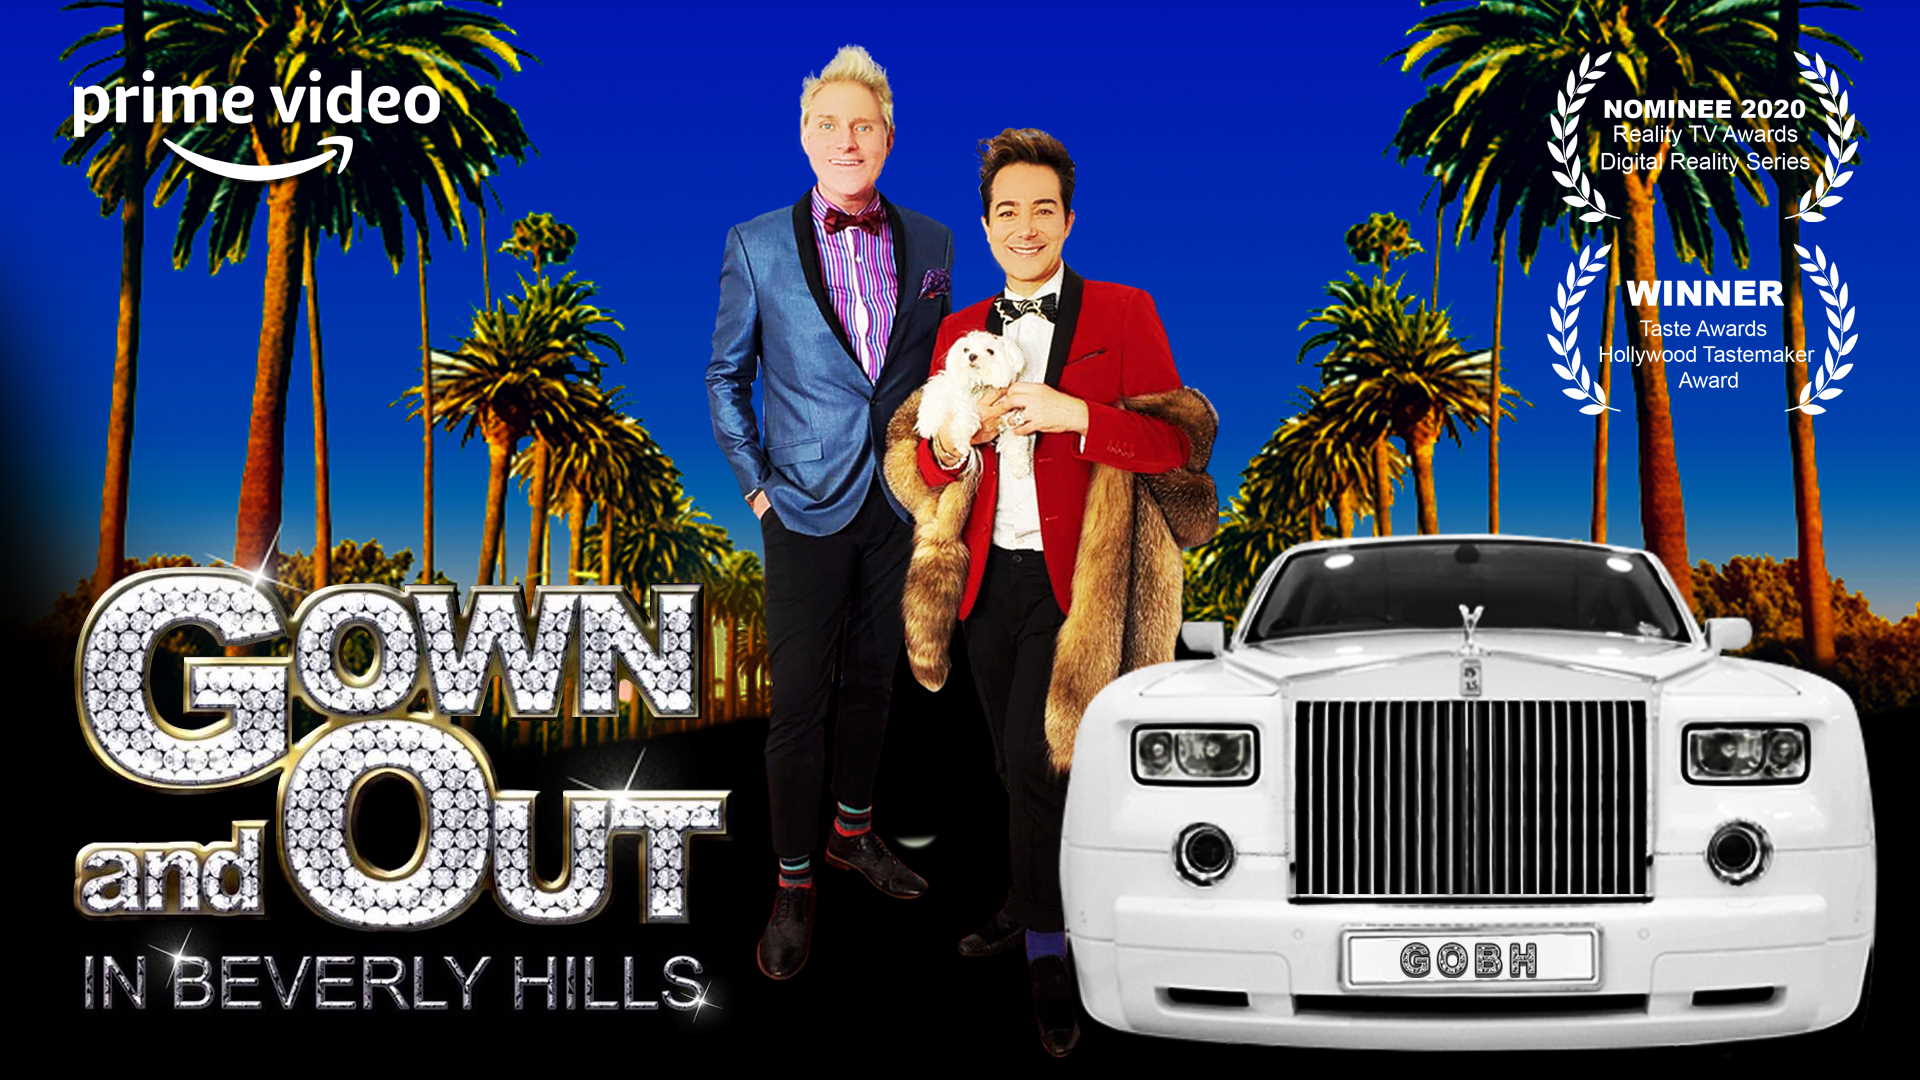 Gown and Out in Beverly Hills: Season 2